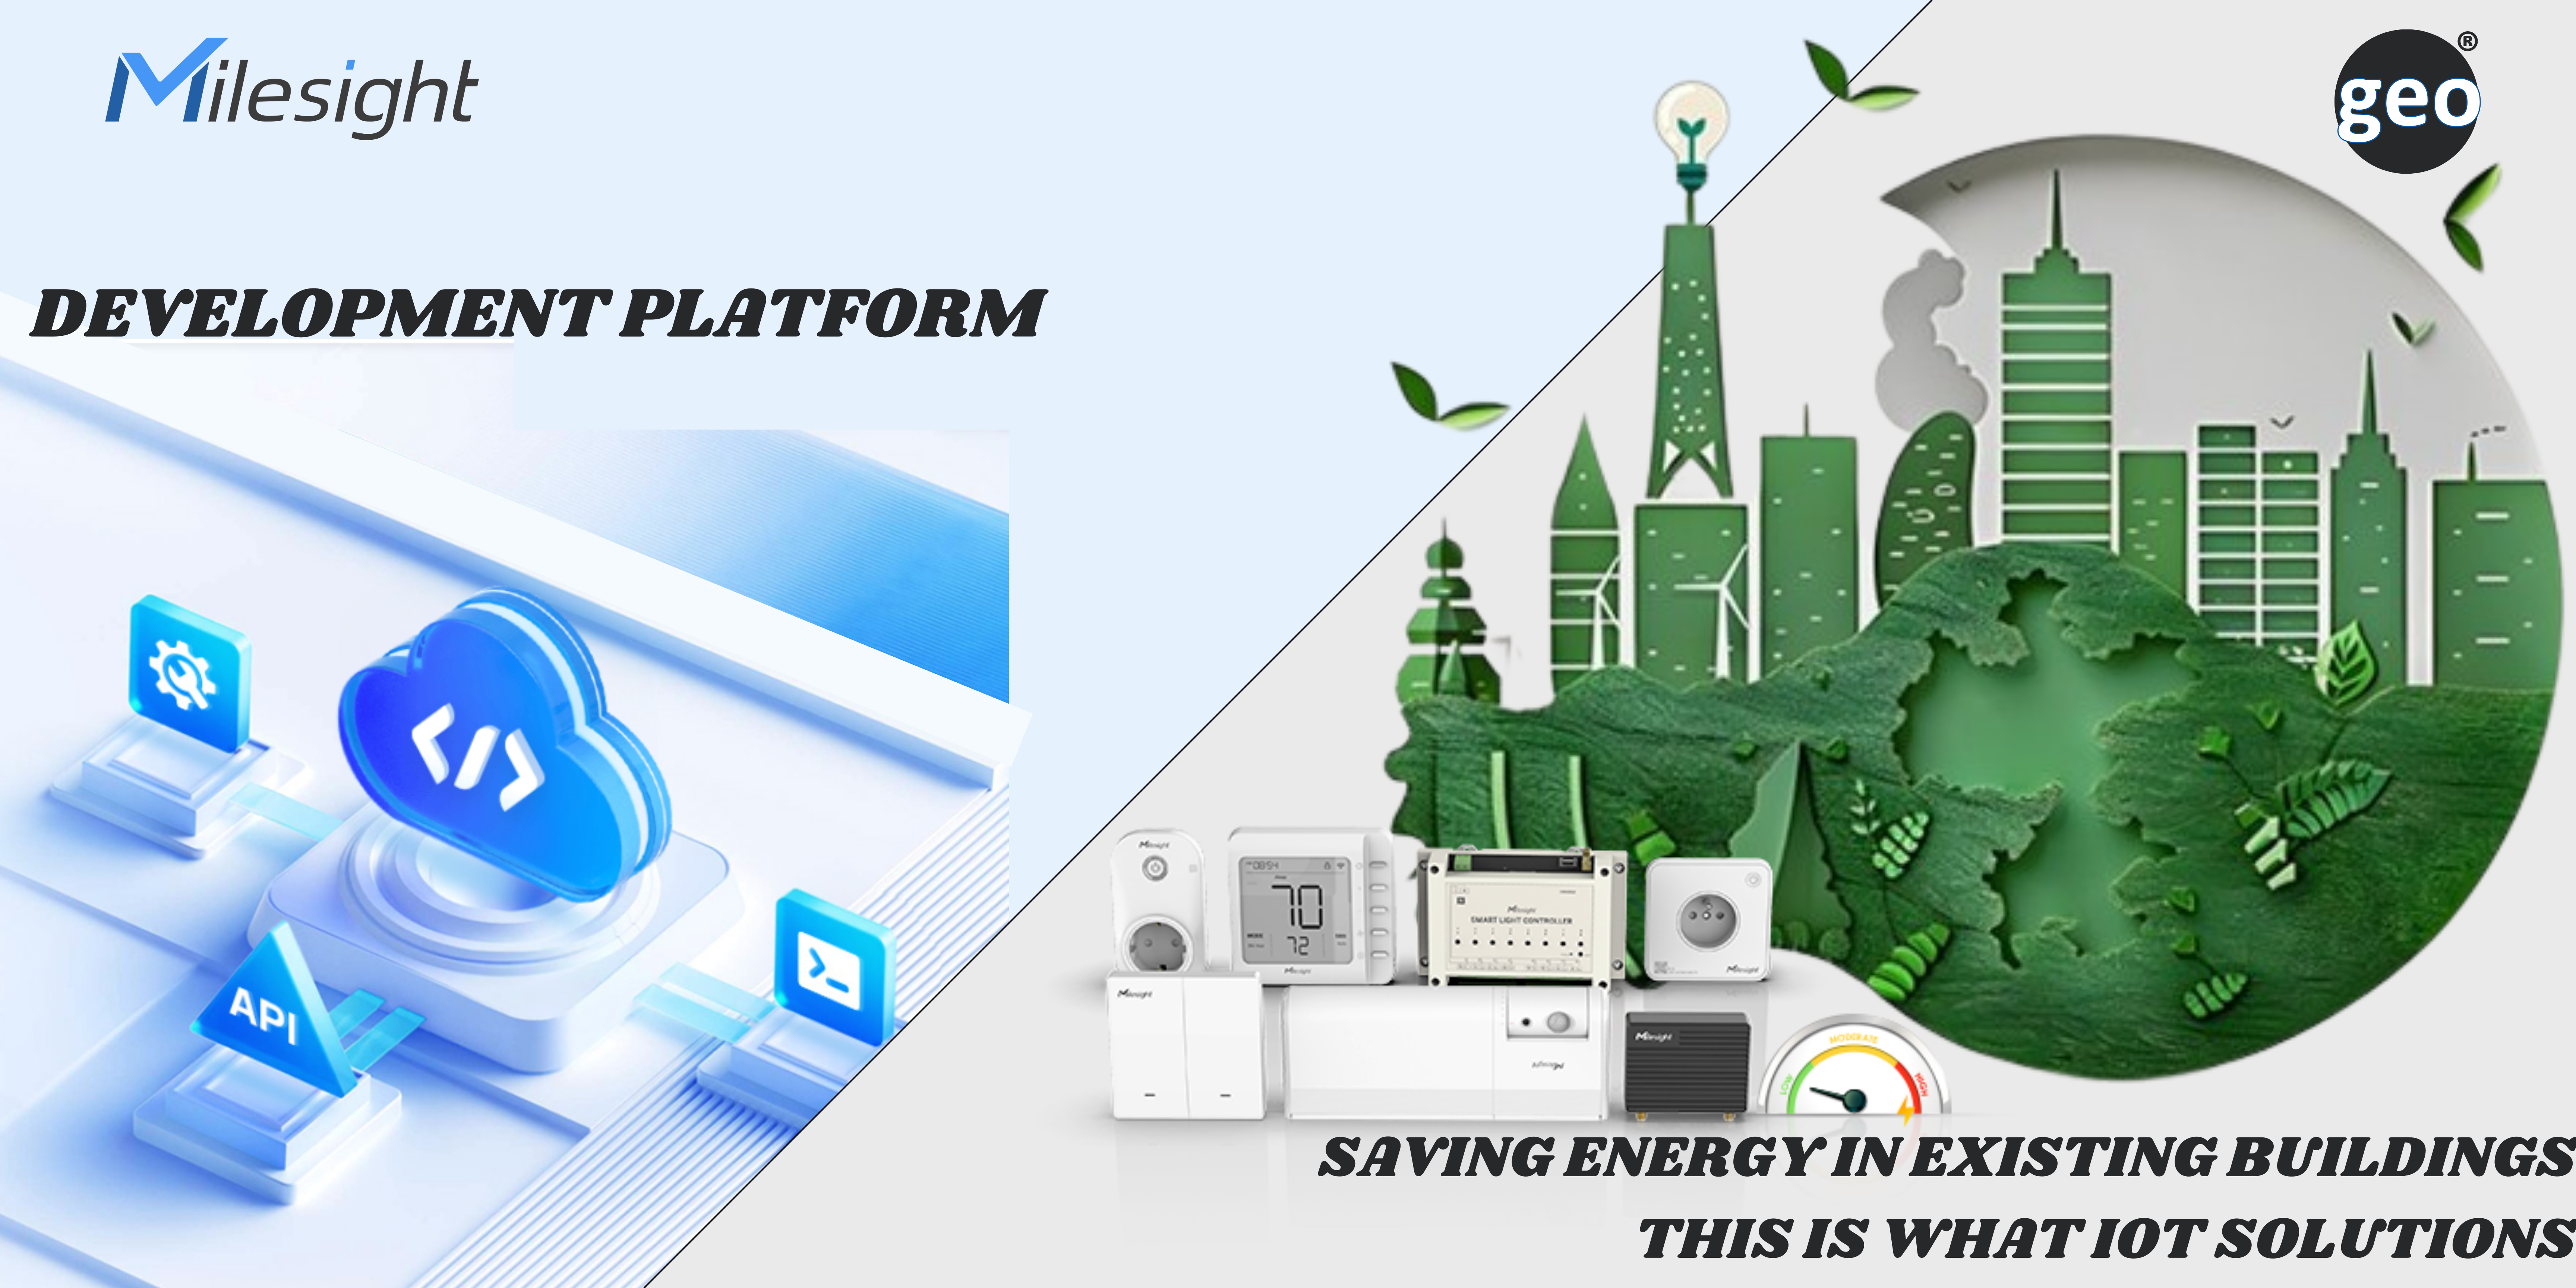 Milesight: The Solution for Building Energy Efficiency and Development Platform